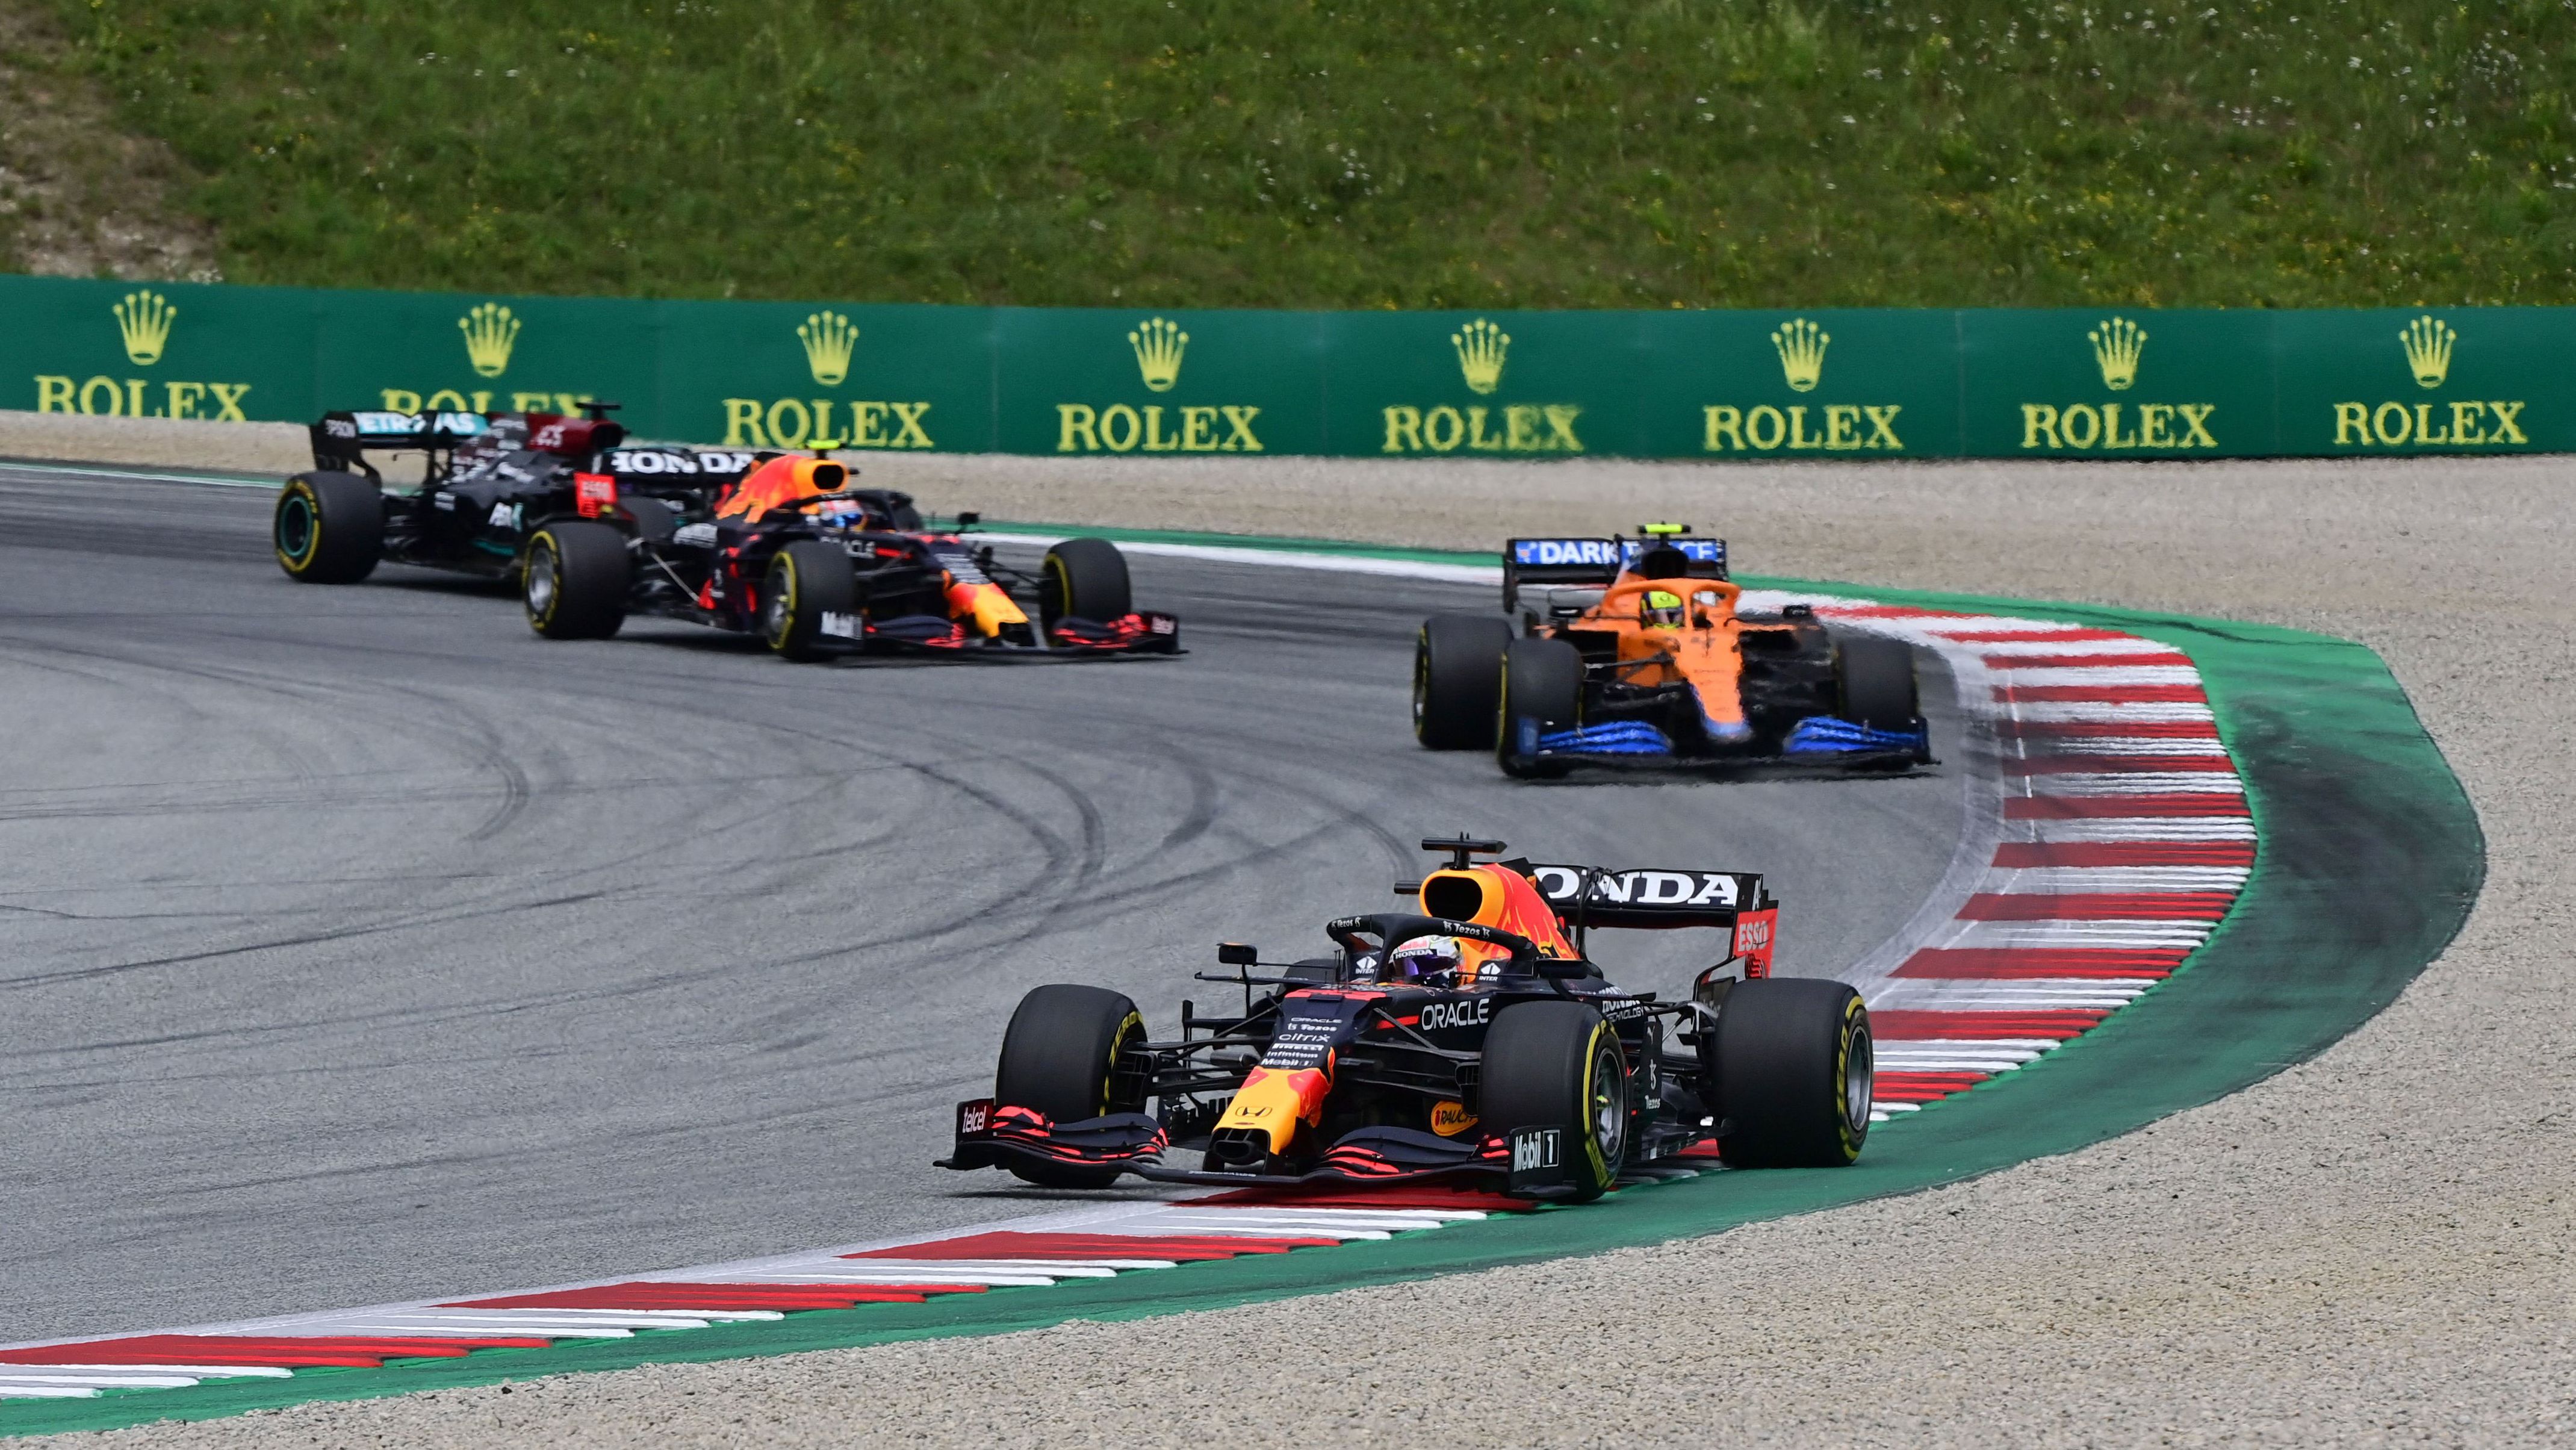 Verstappen takes the lead at the start of the Austrian Grand Prix, ahead of McLaren's Lando Norris, Red Bull's Sergio Perez and Mercedes'  Lewis Hamilton.